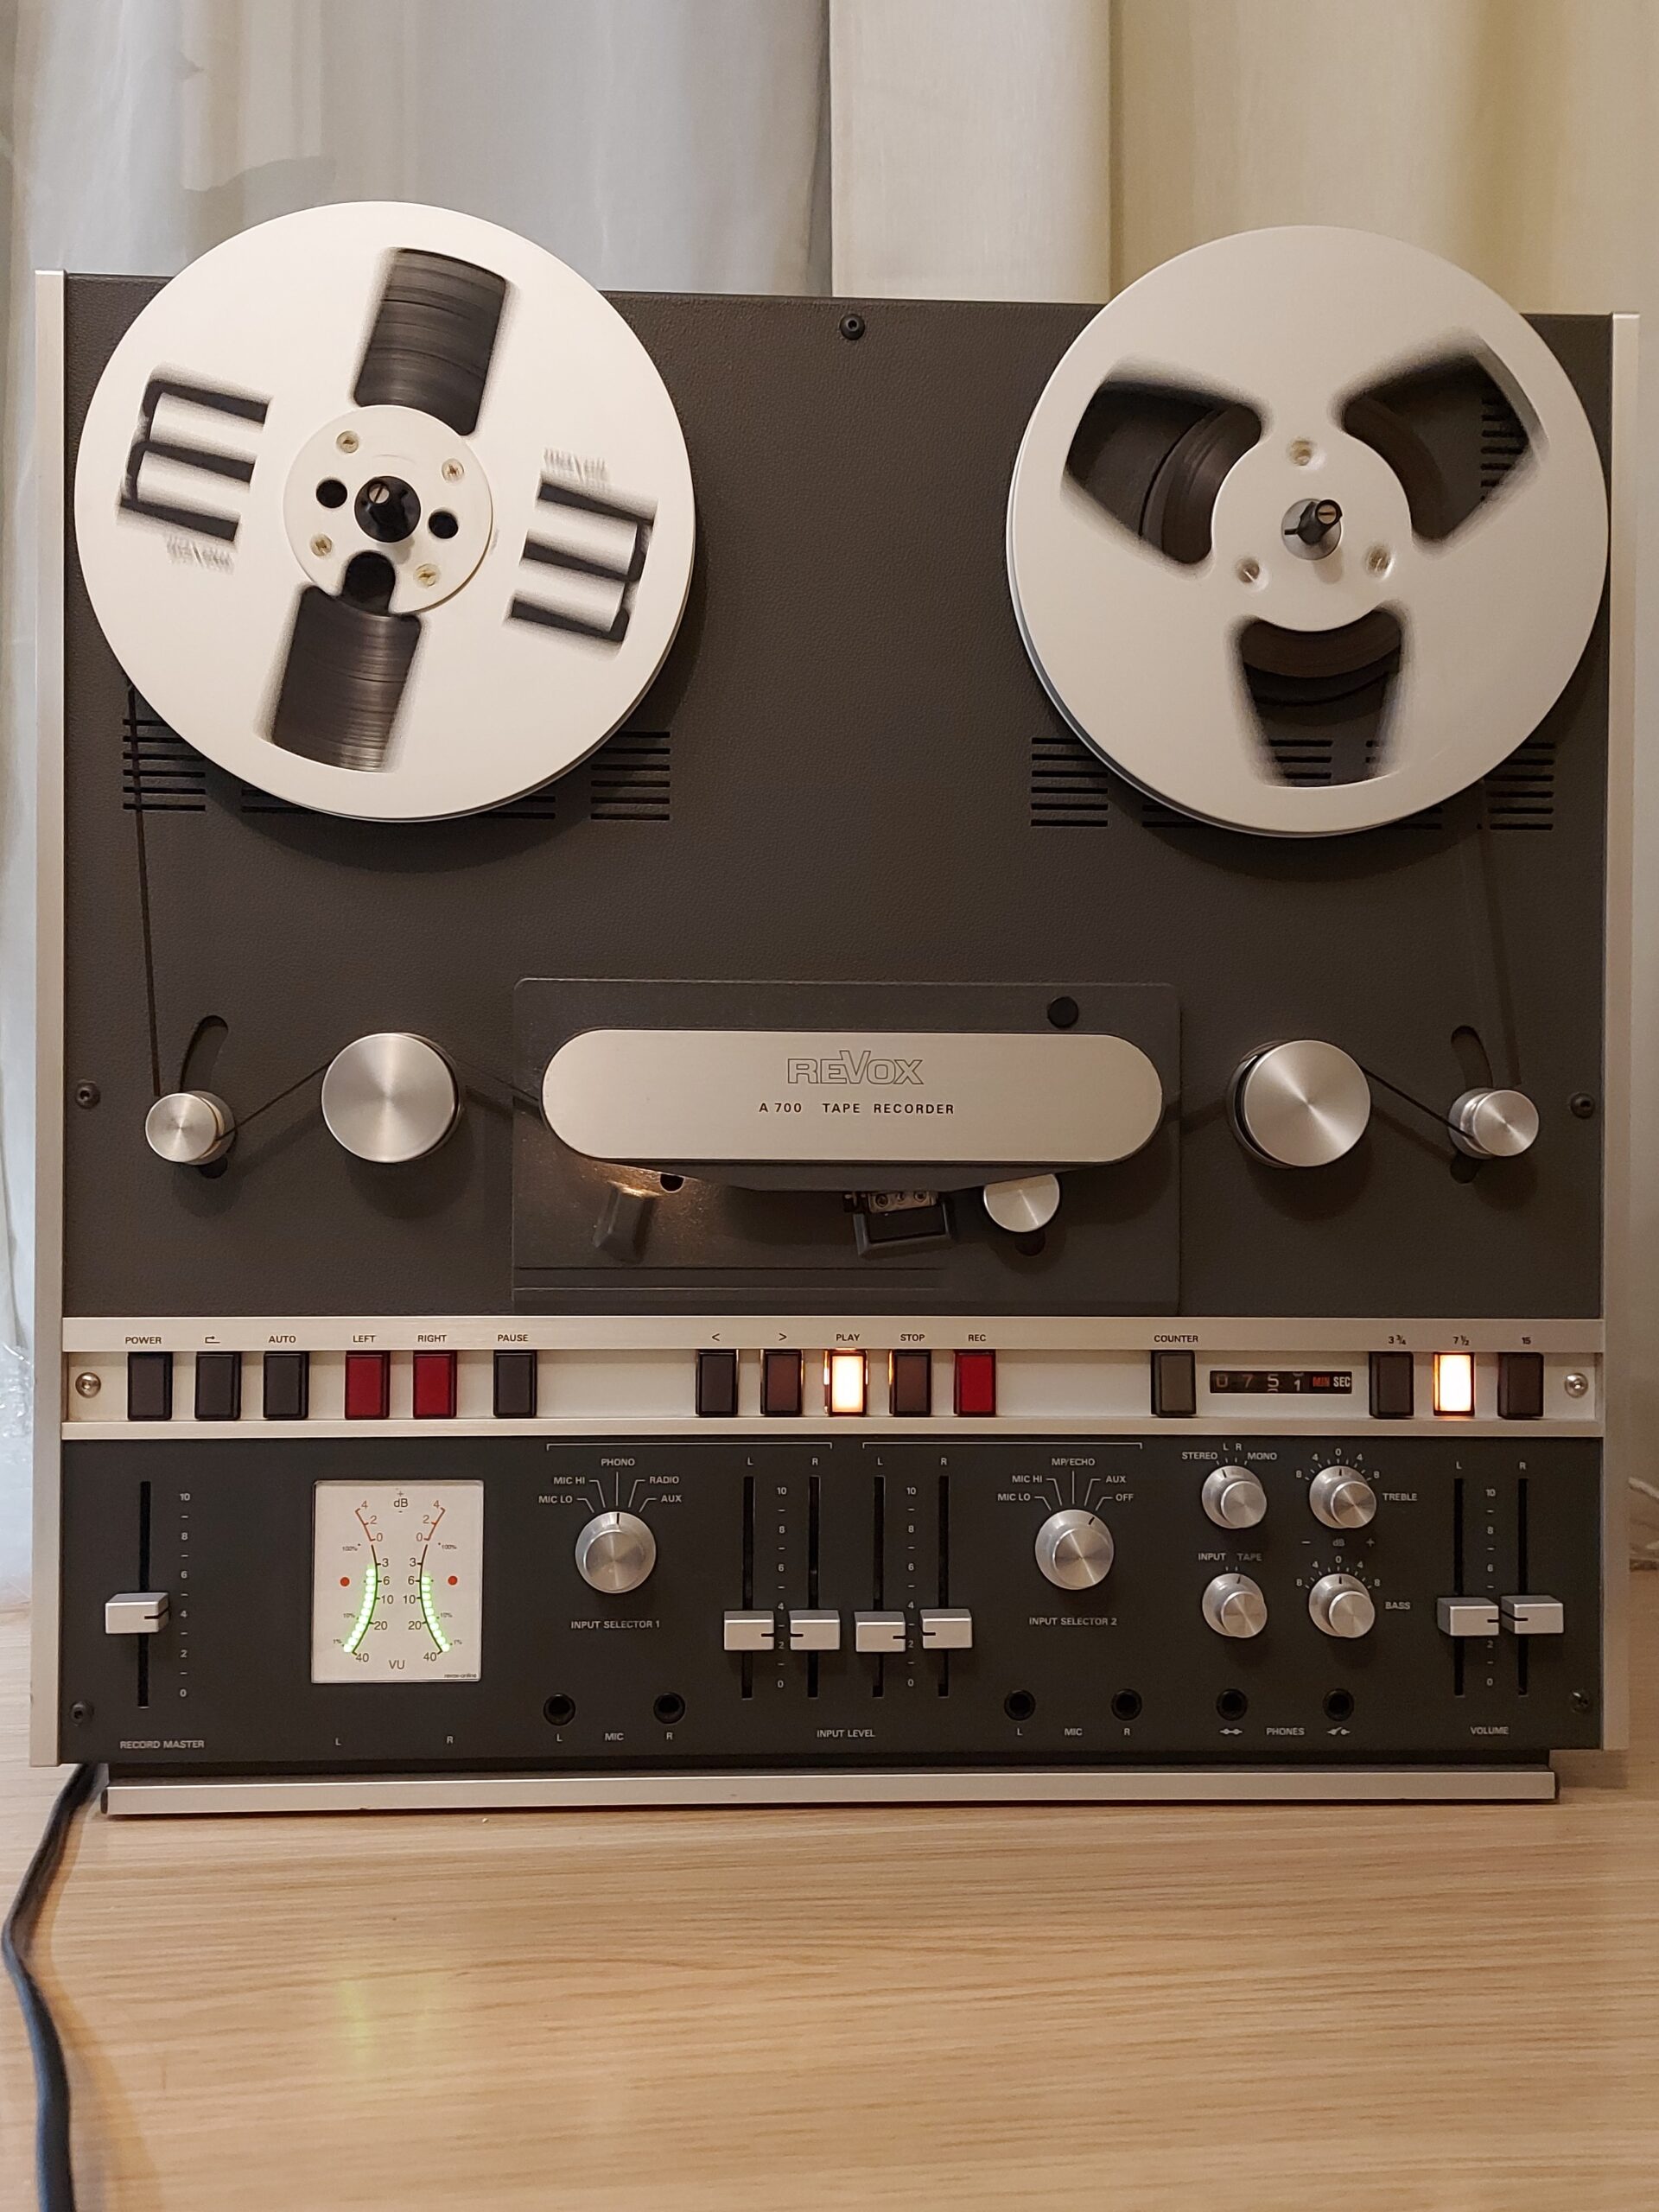 ReVox A700 4-track 3.75 7.5 15 ips 9.5 19 38 cm/s Multivoltage 100-240V Stereo Tape Recorder Reel to Reel Player Refurbished Calibrated